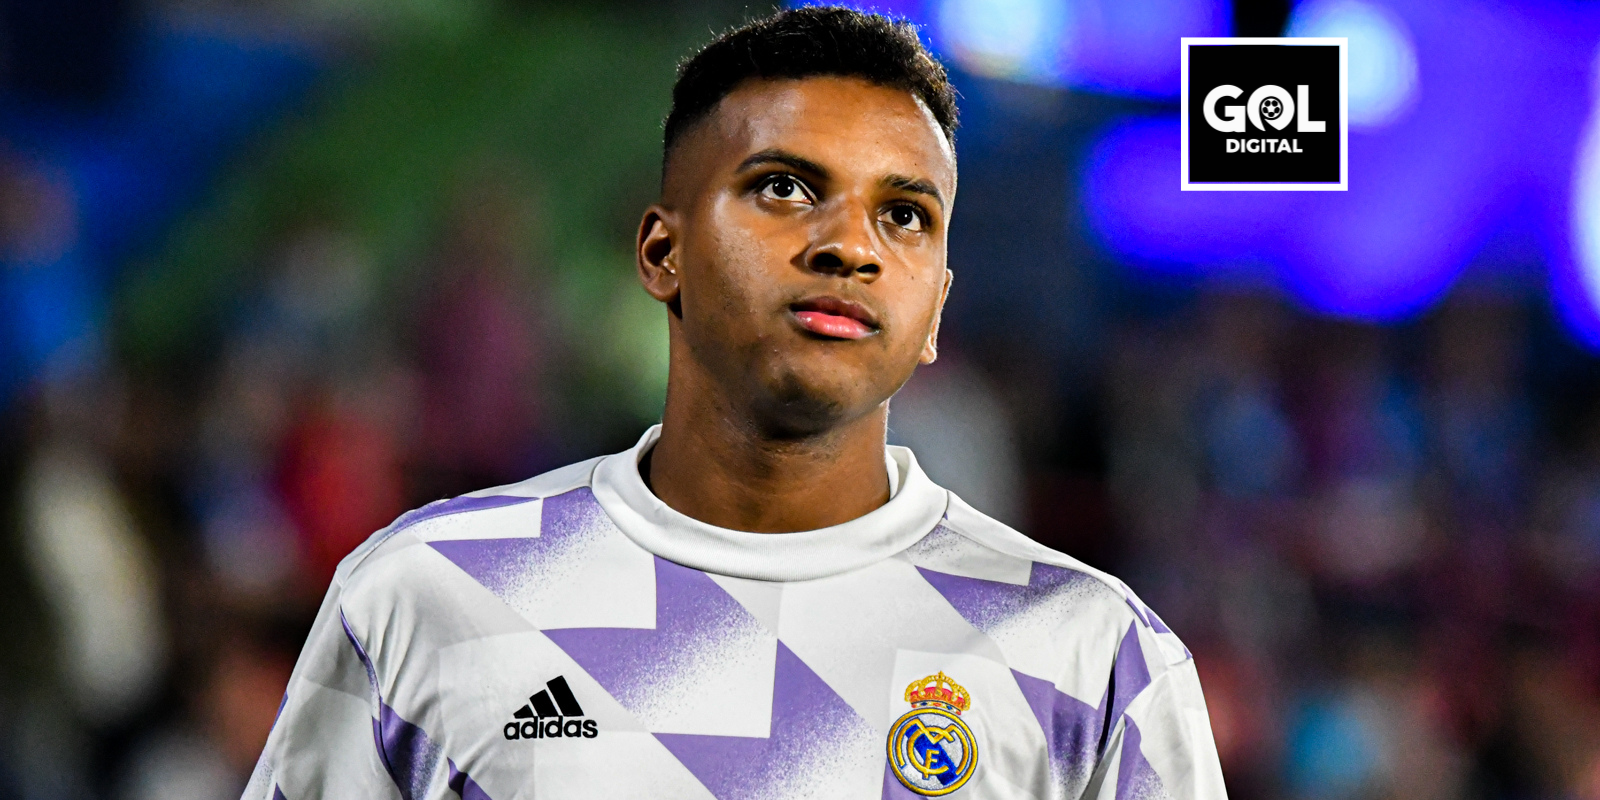 Rodrygo goes up to the offices to leave Real Madrid
